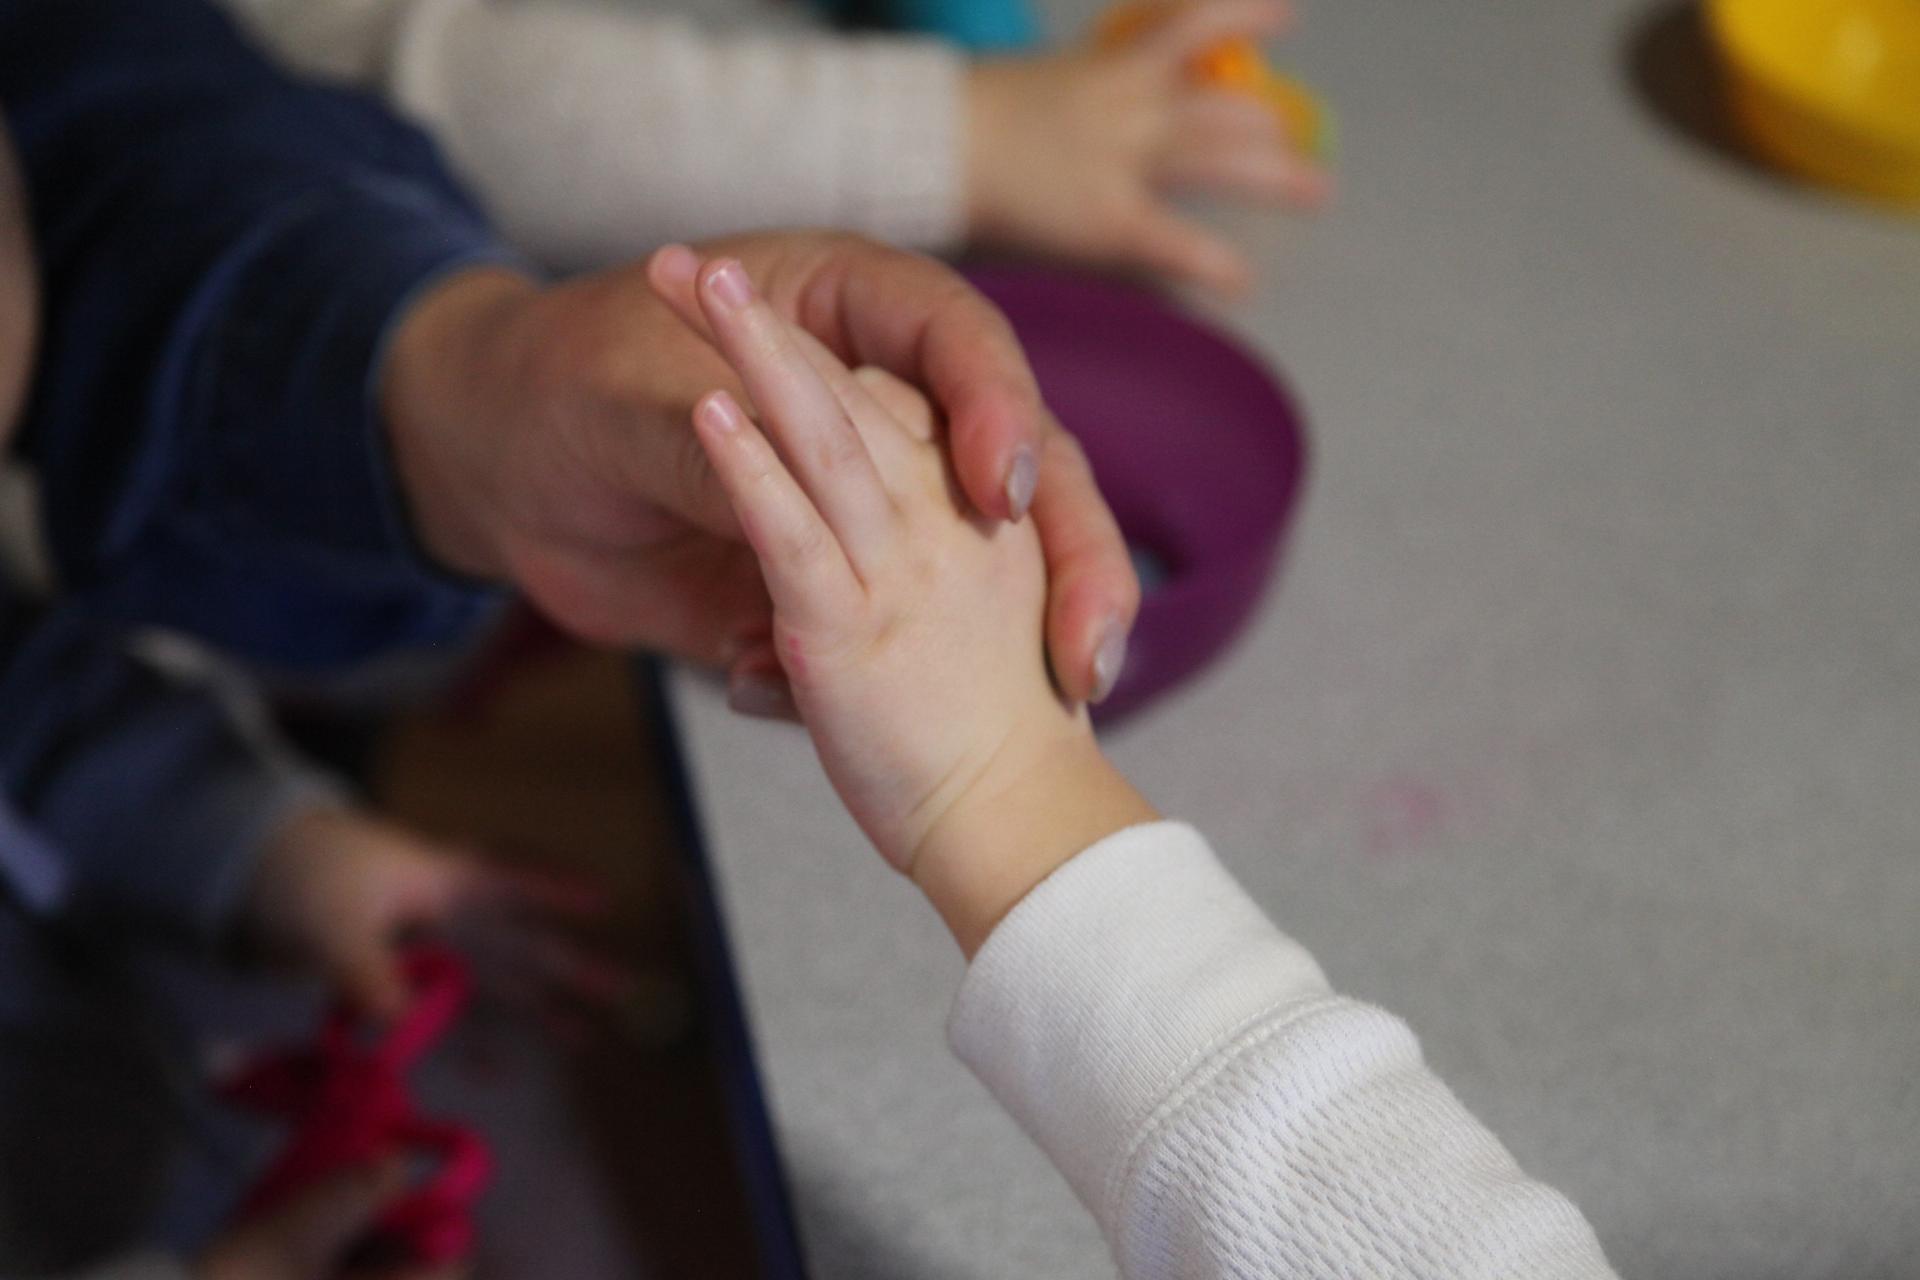 A woman touches a child's hand